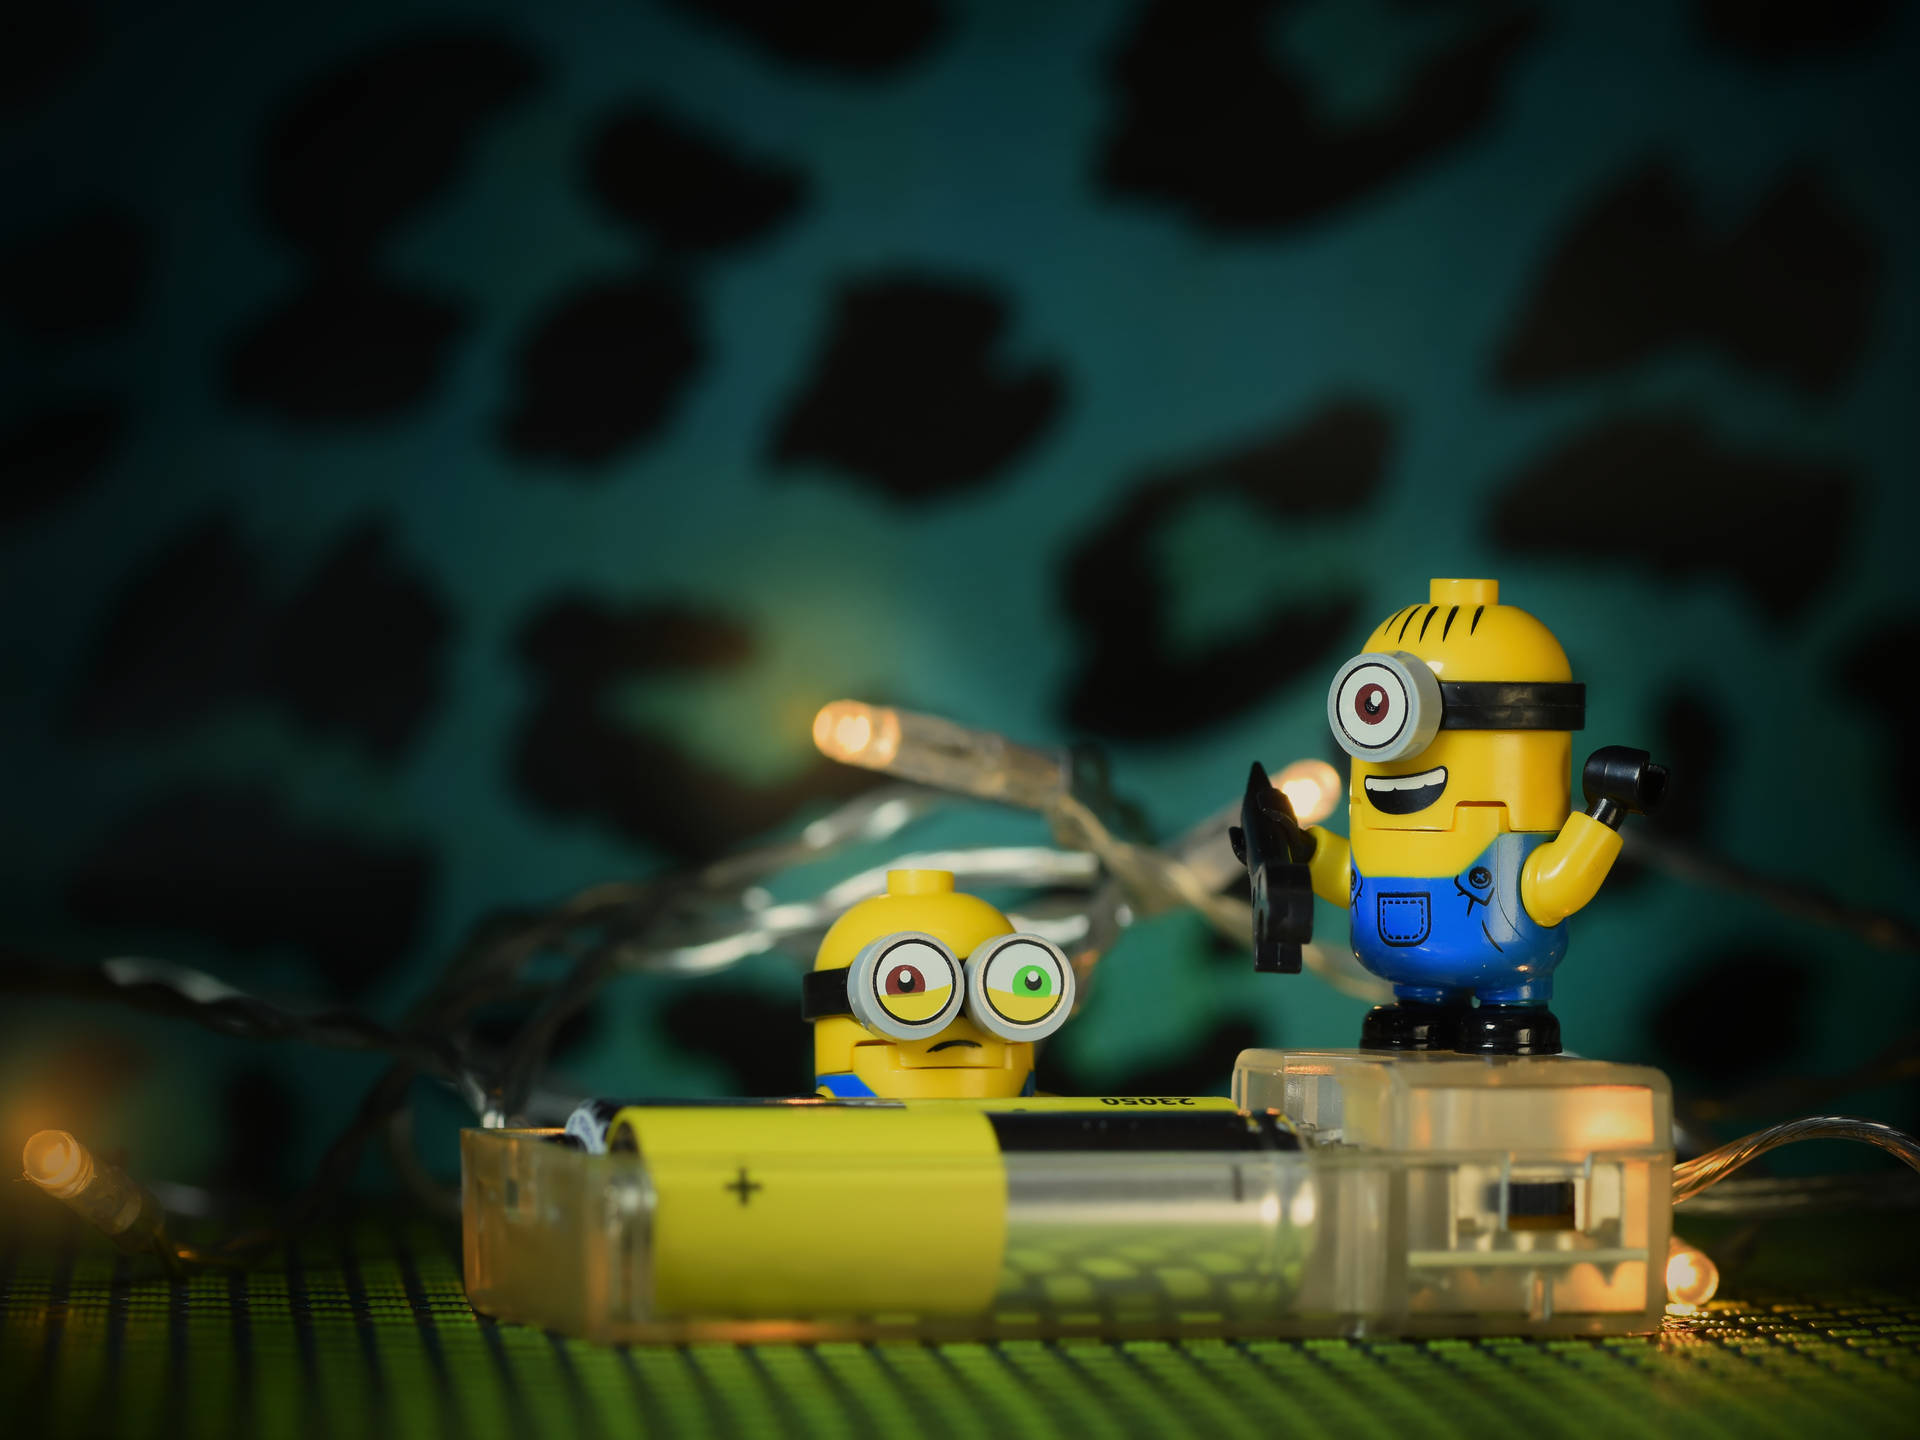 Minions 5135X3851 Wallpaper and Background Image